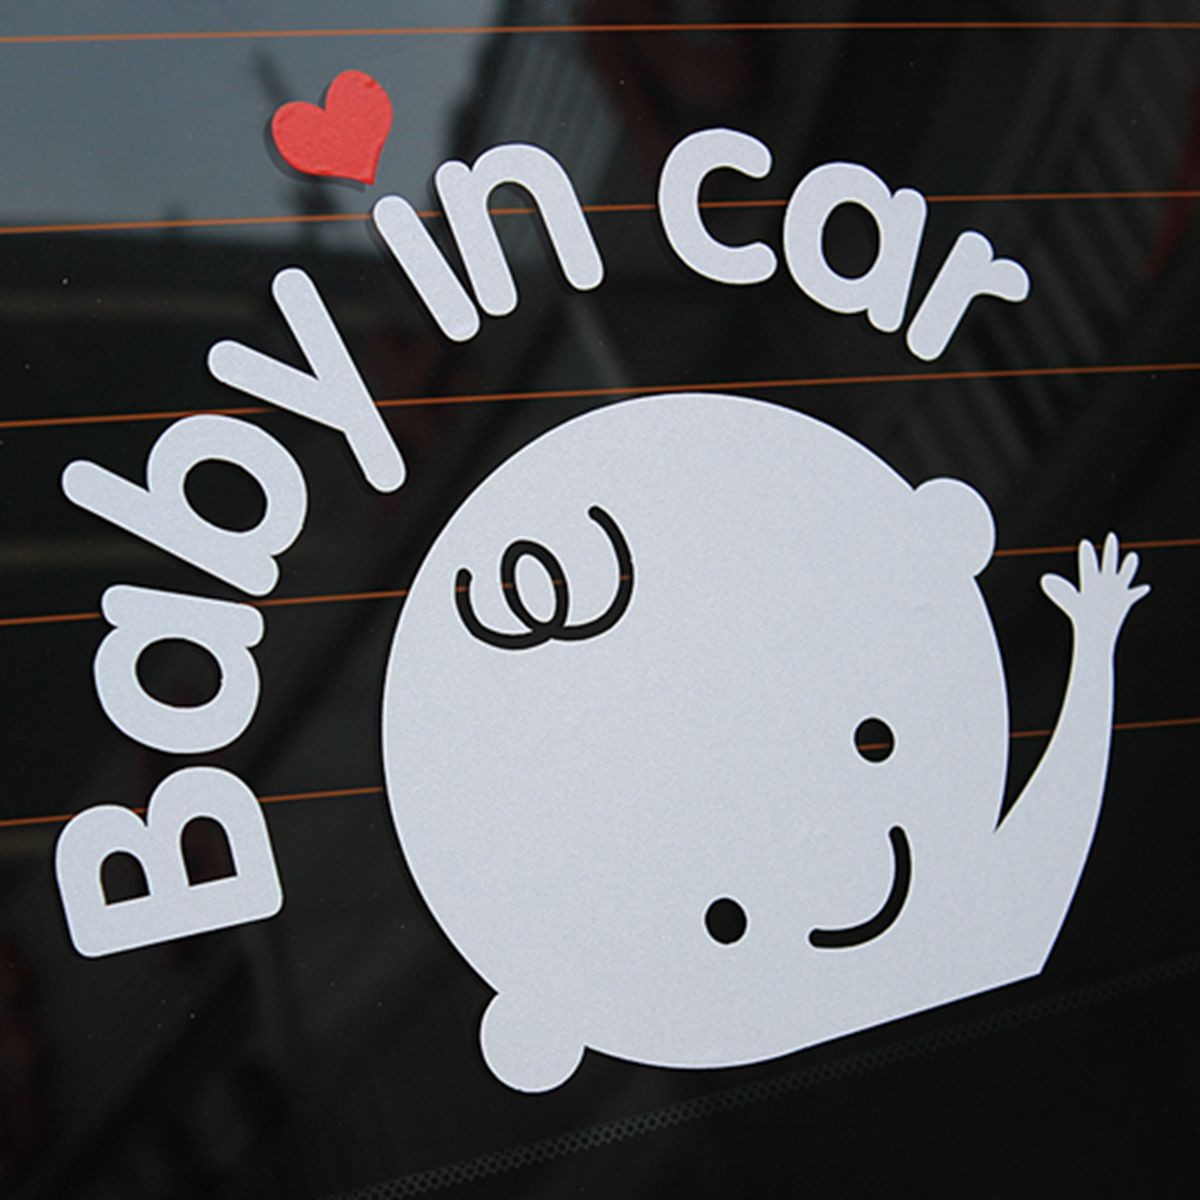 Baby-In-Car-Waving-Baby-on-Board-Safety-Sign-Cute-Car-Decal-Vinyl-Sticker-1060329